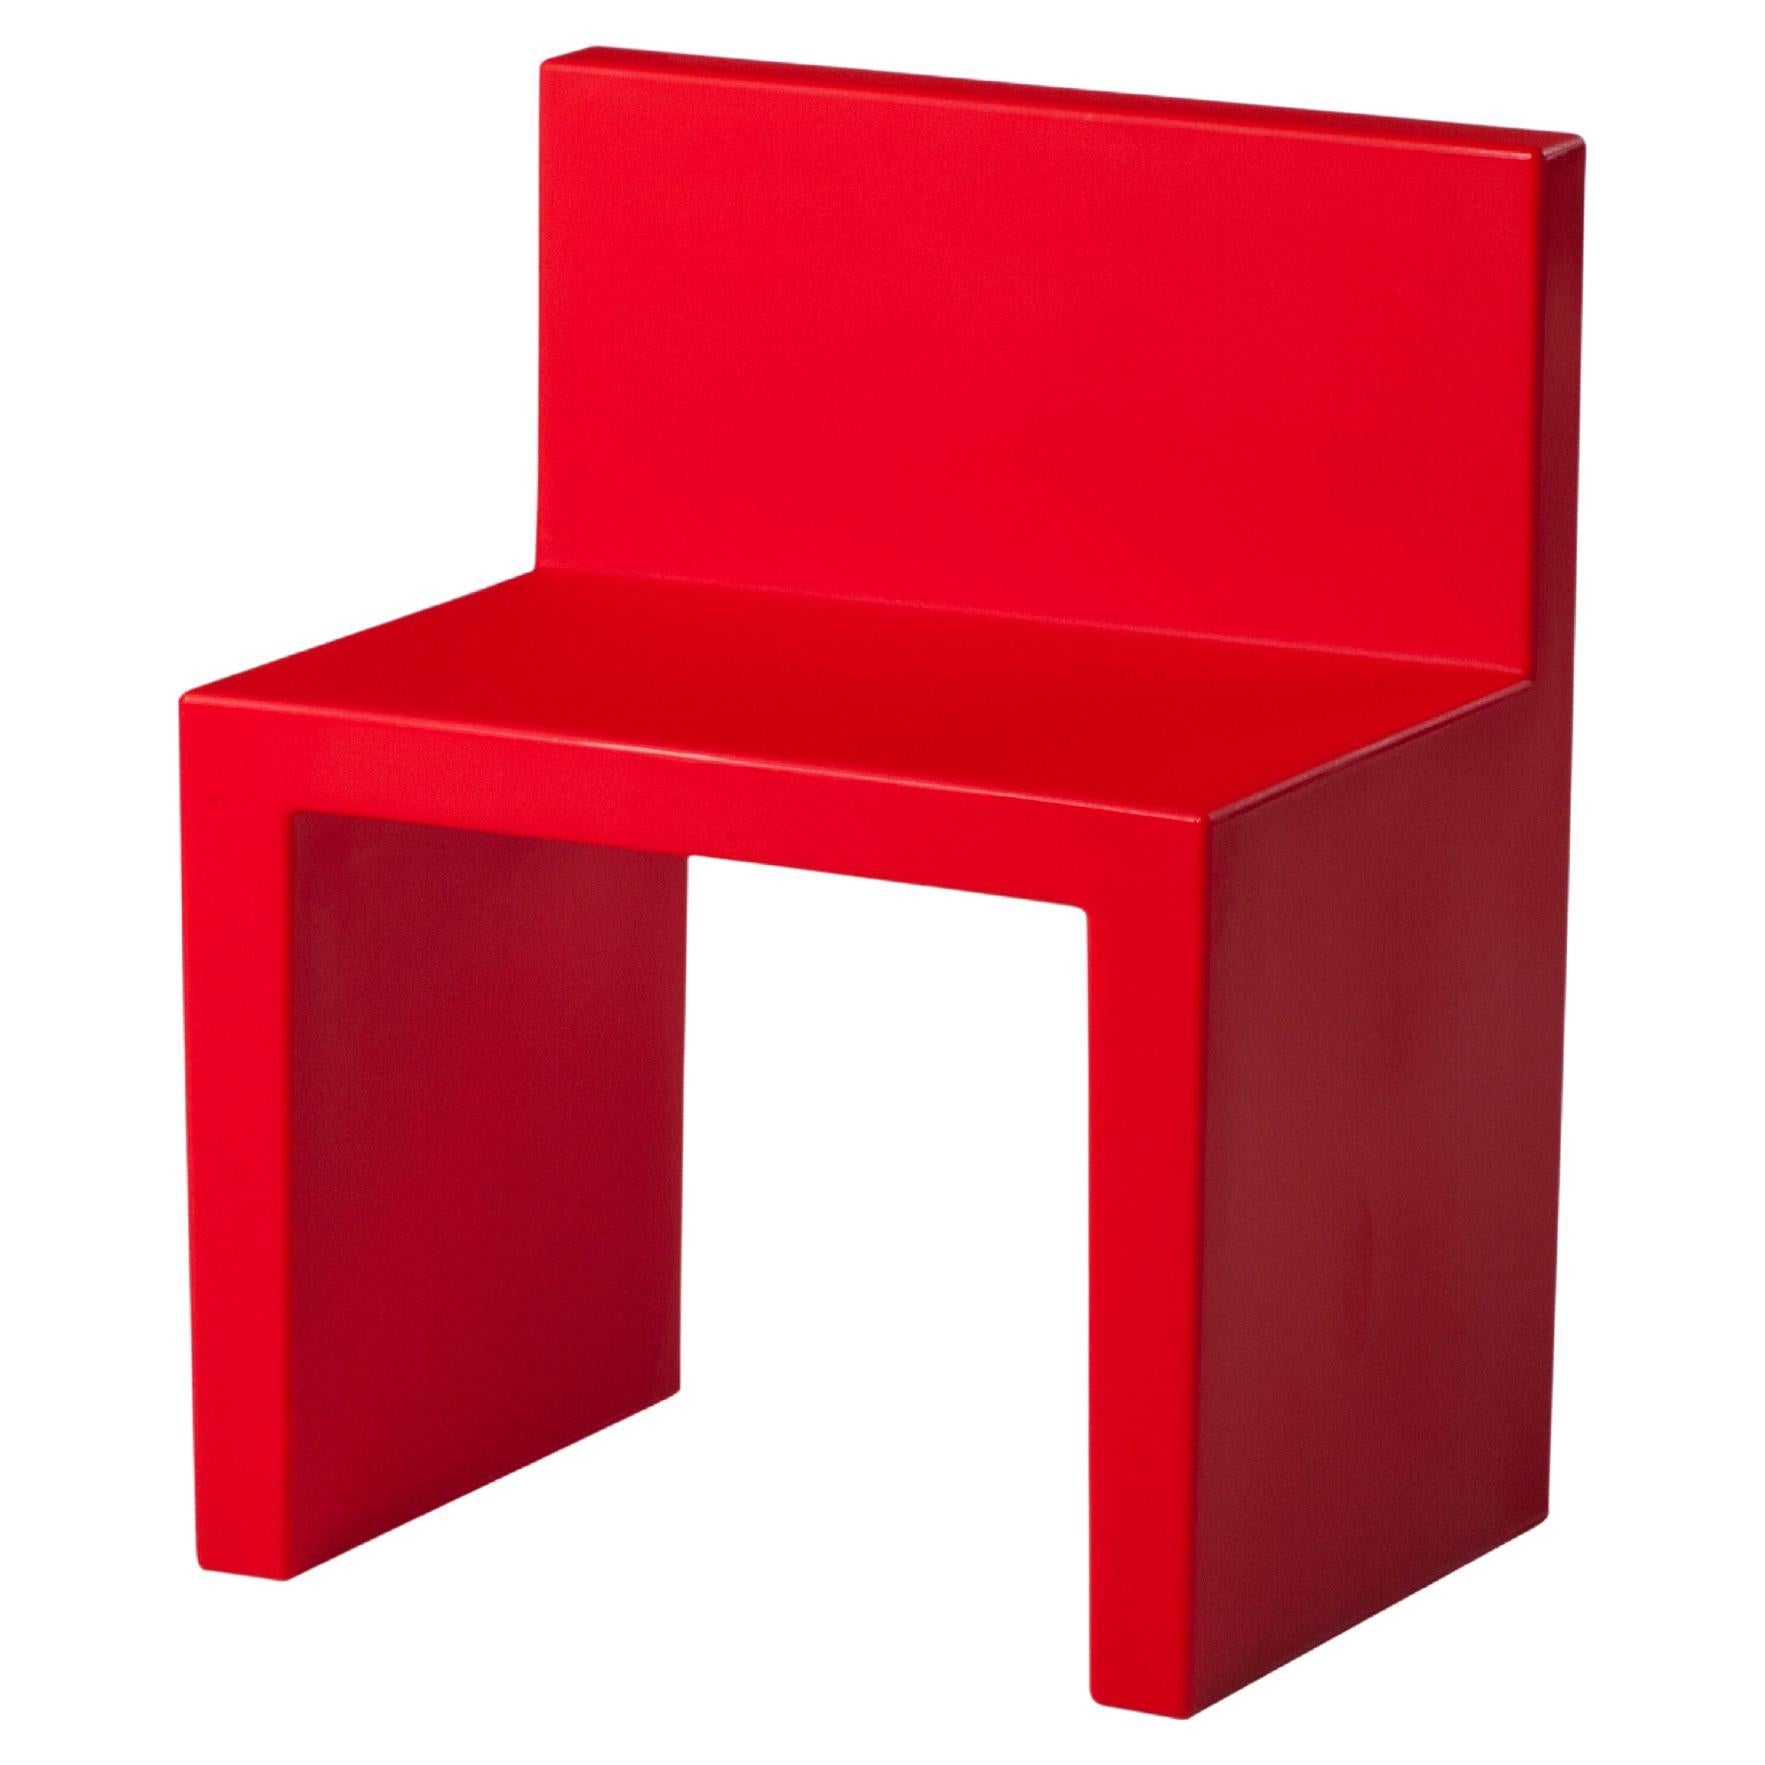 Slide Design Angolo Retto Kids Chair in Flame Red by Slide Studio